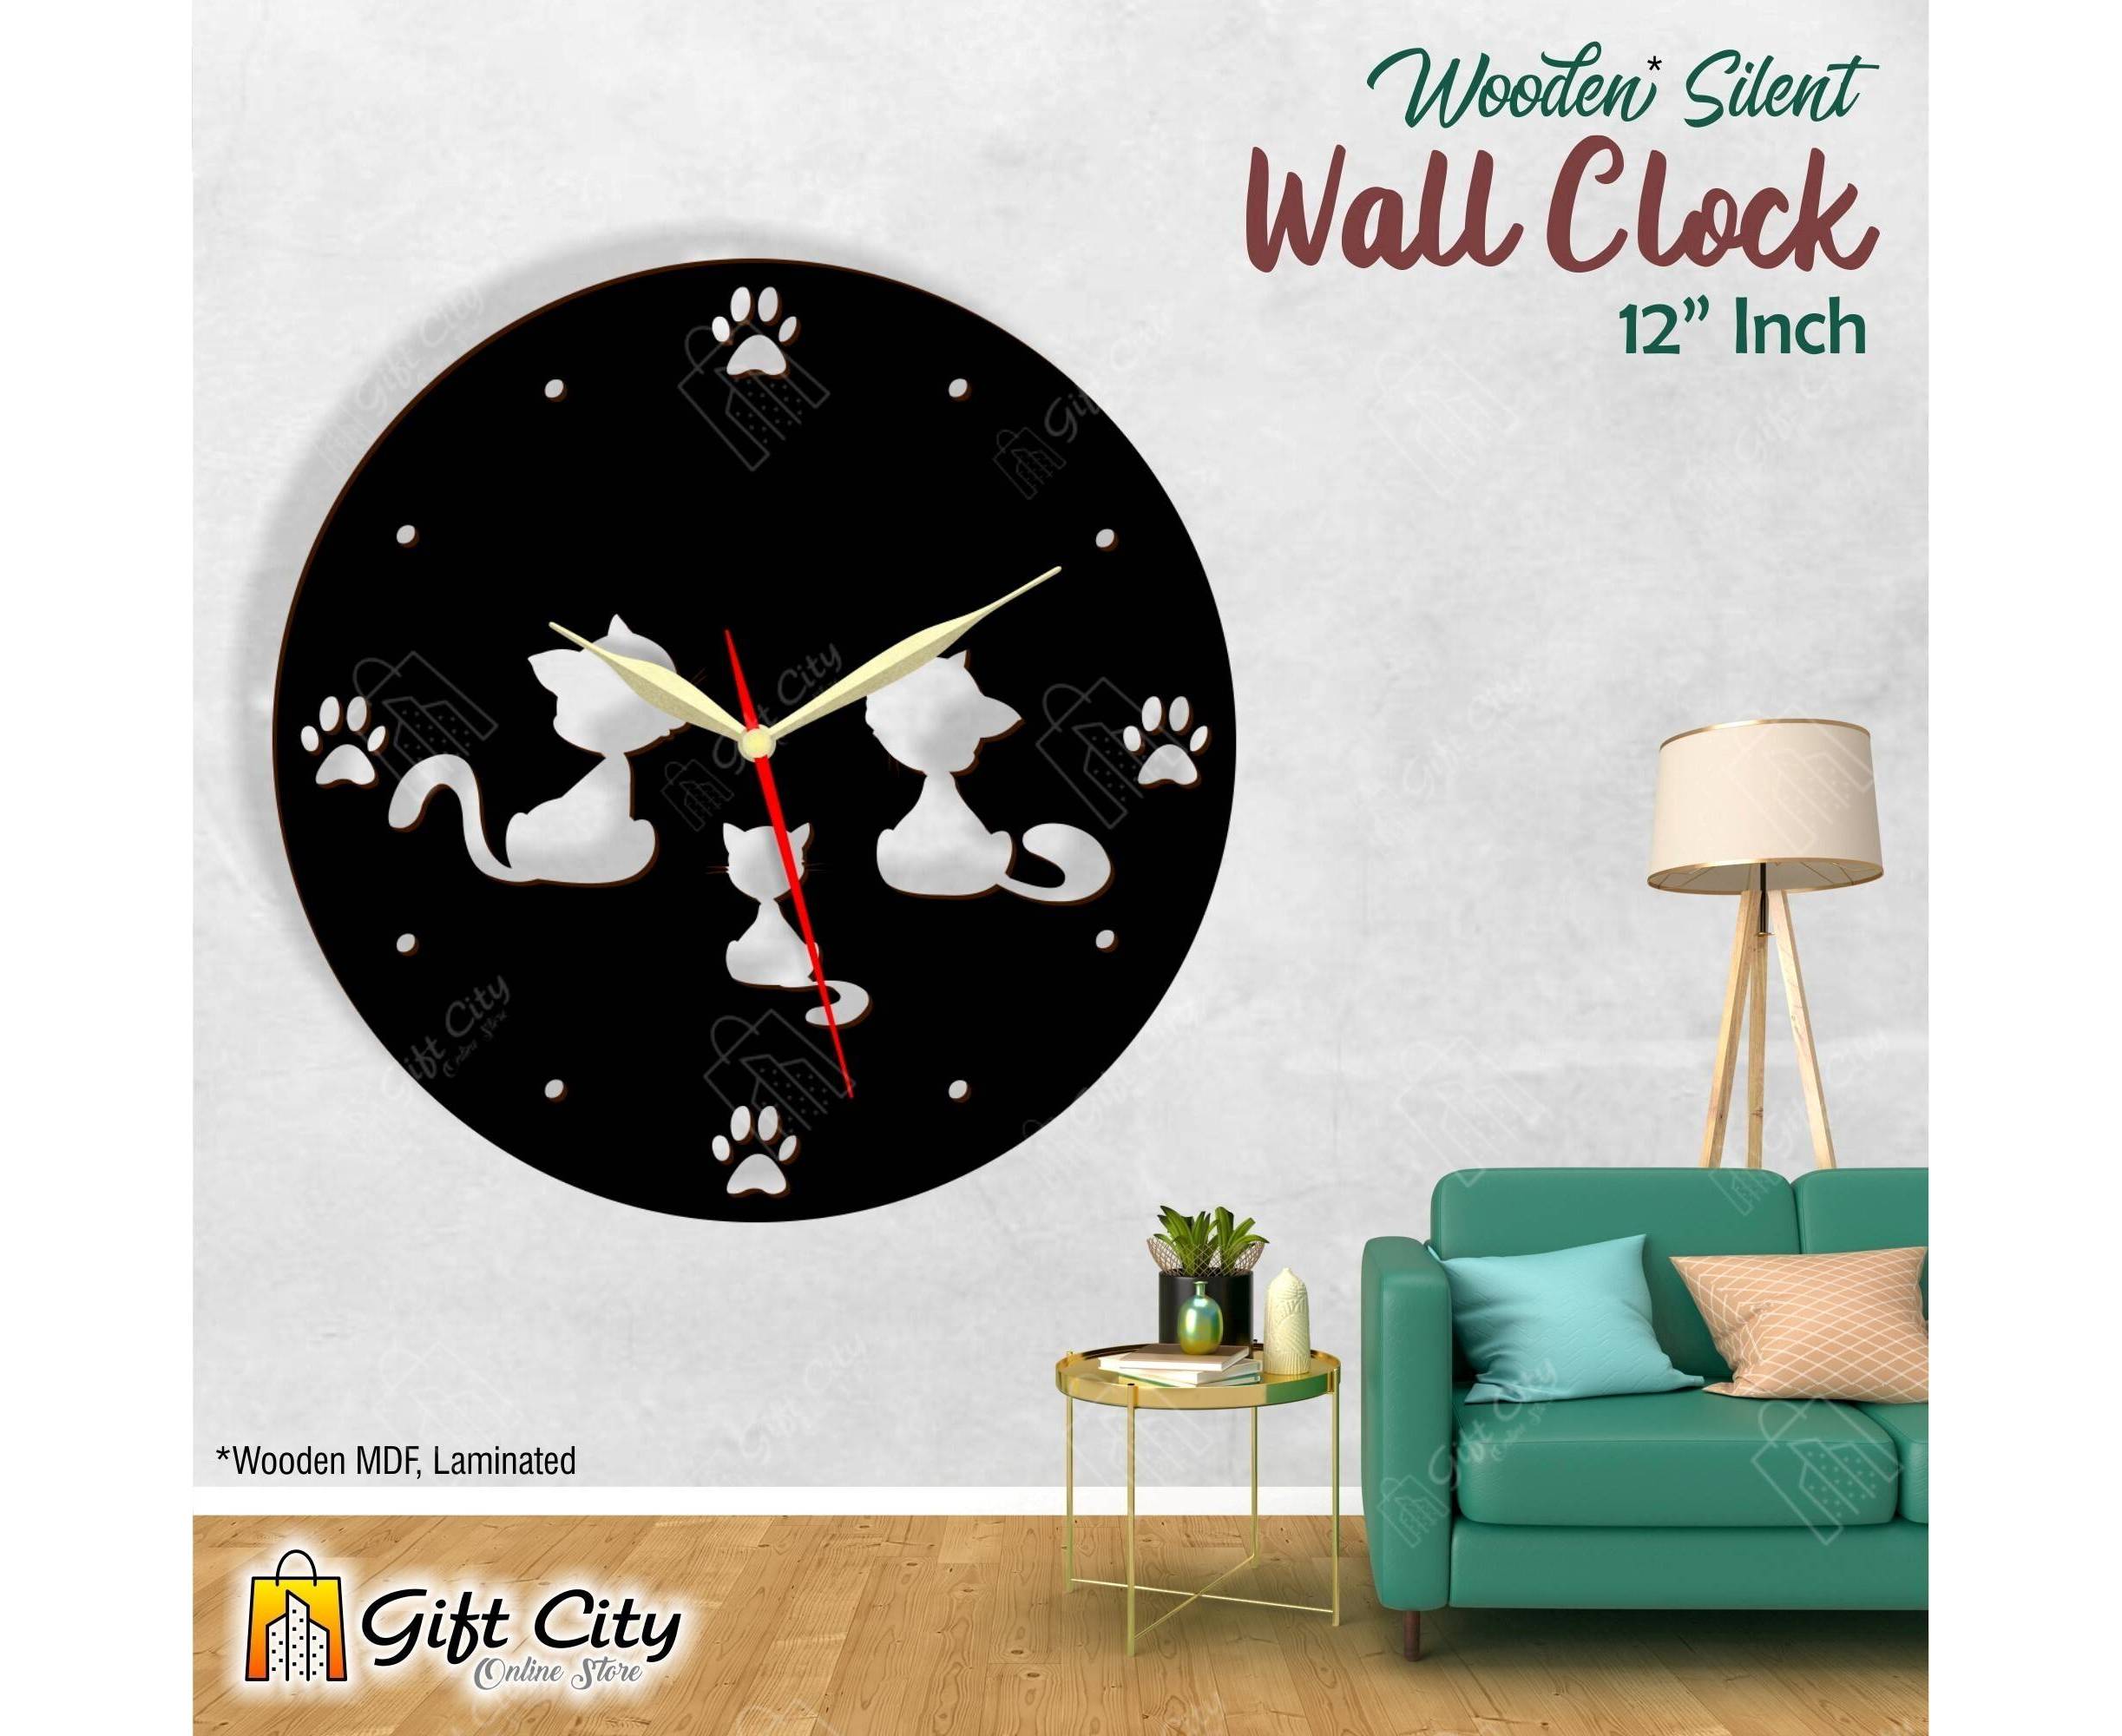 10 Best Acrylic Decorative Wall Clocks for Home